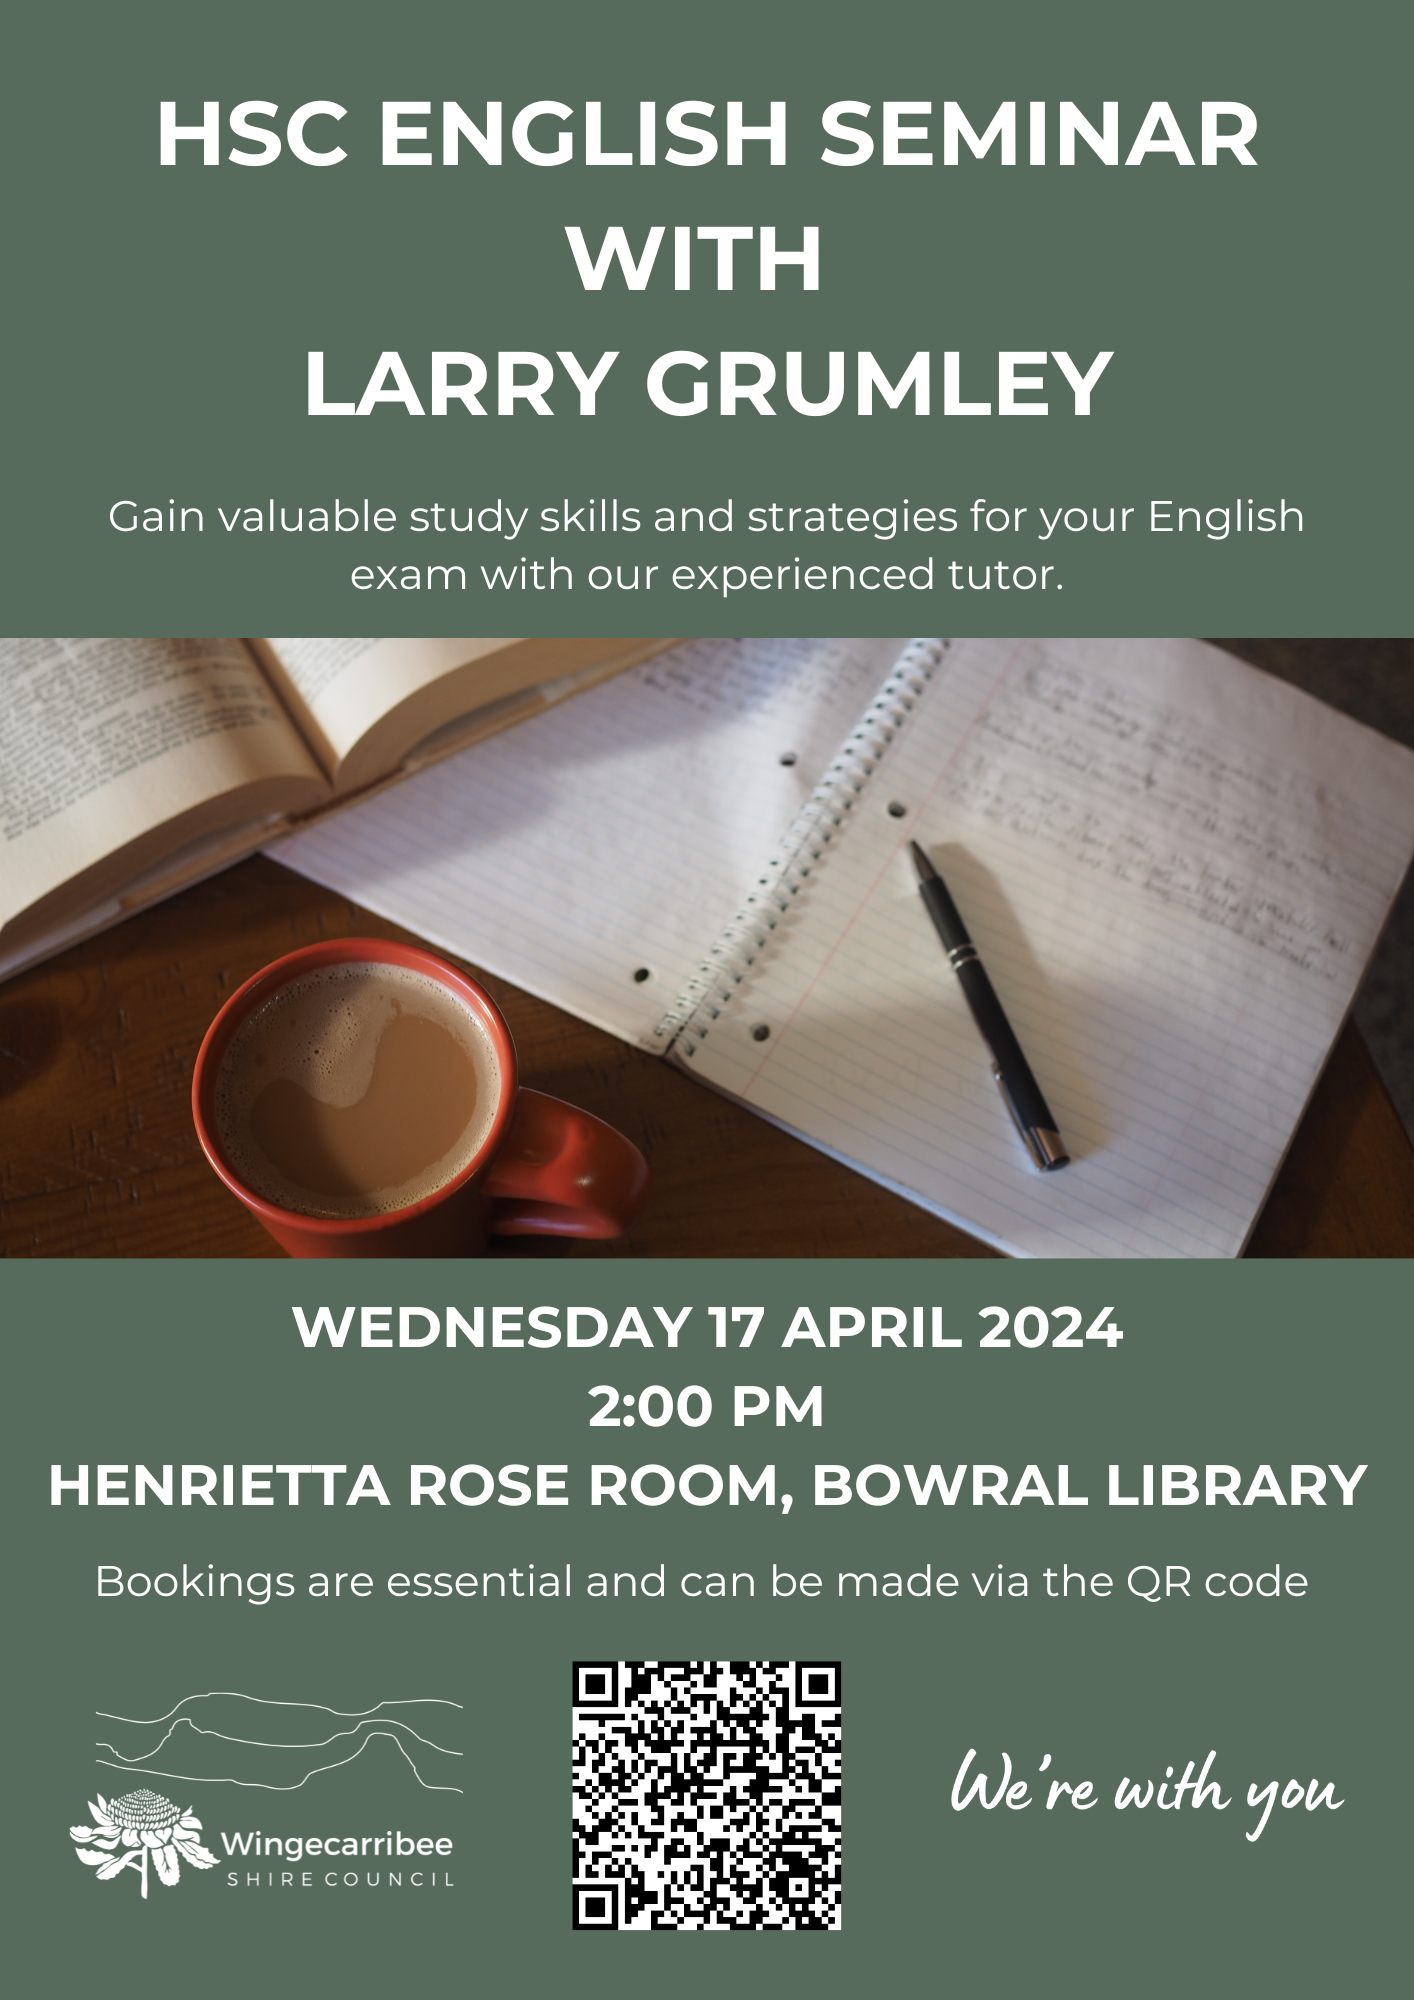 Flyer for HSC English Seminiar with Larry Grumley at Bowral Library on 17 April 2024